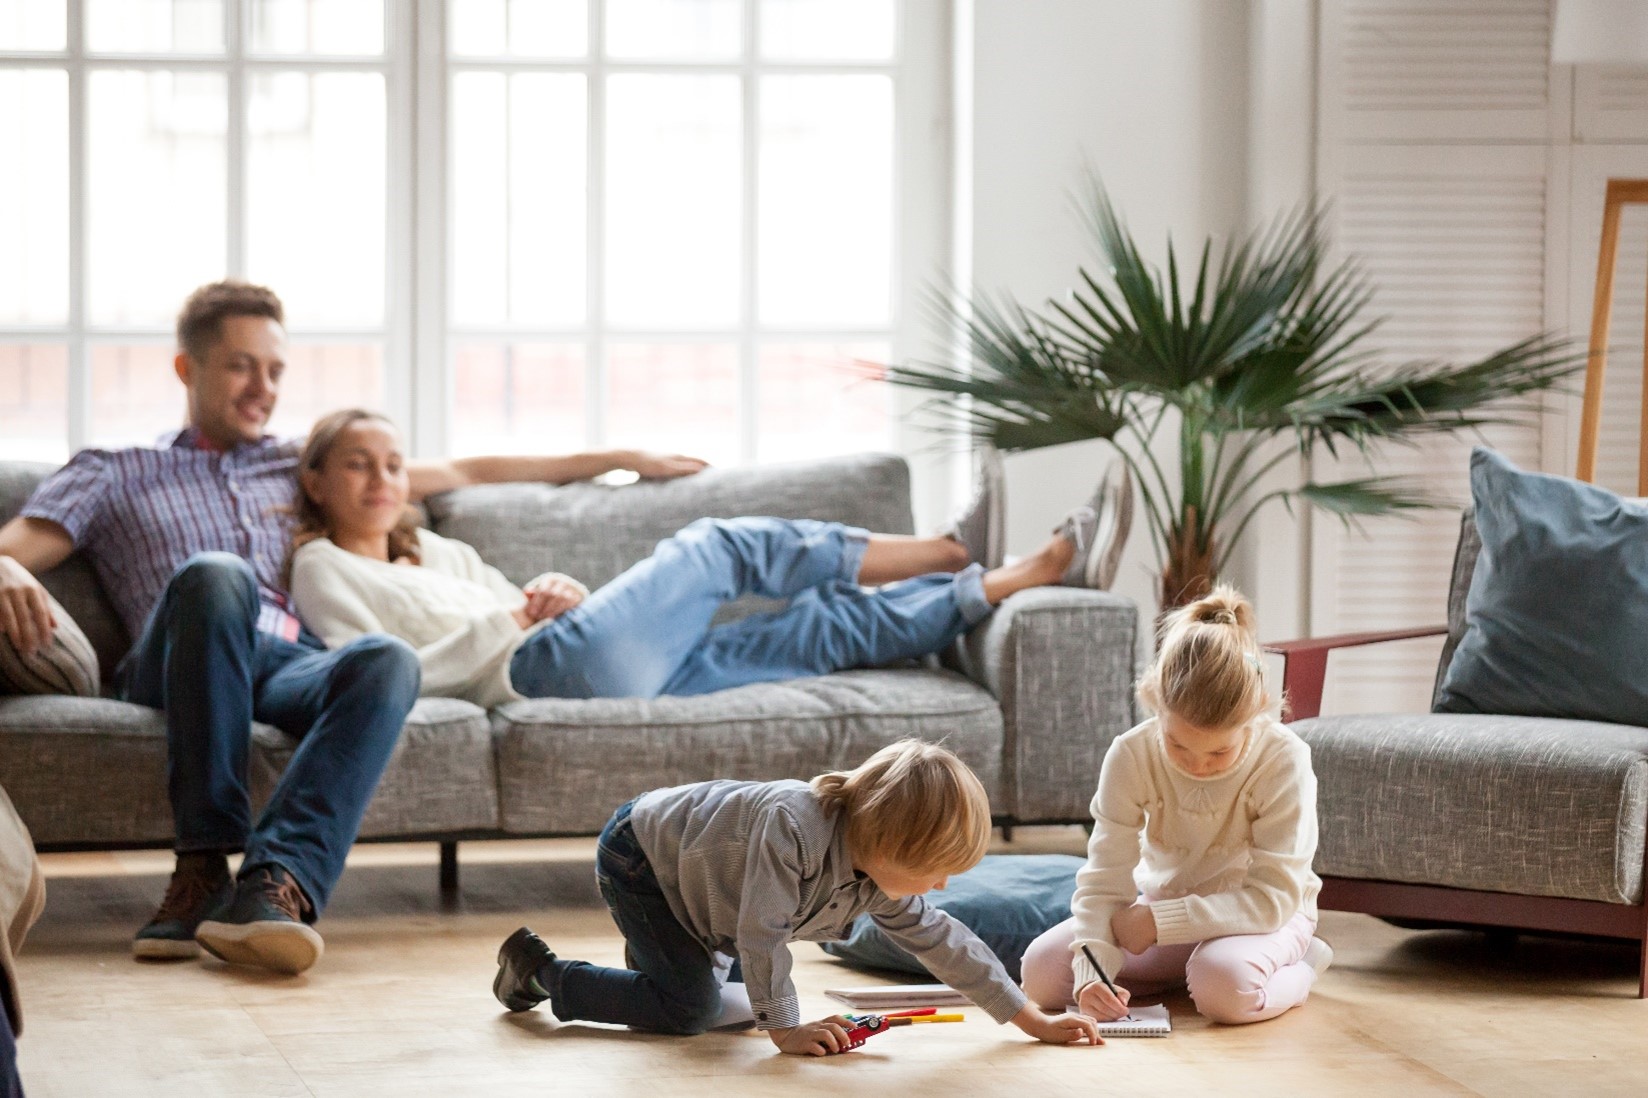 A family relaxing in a living room together.